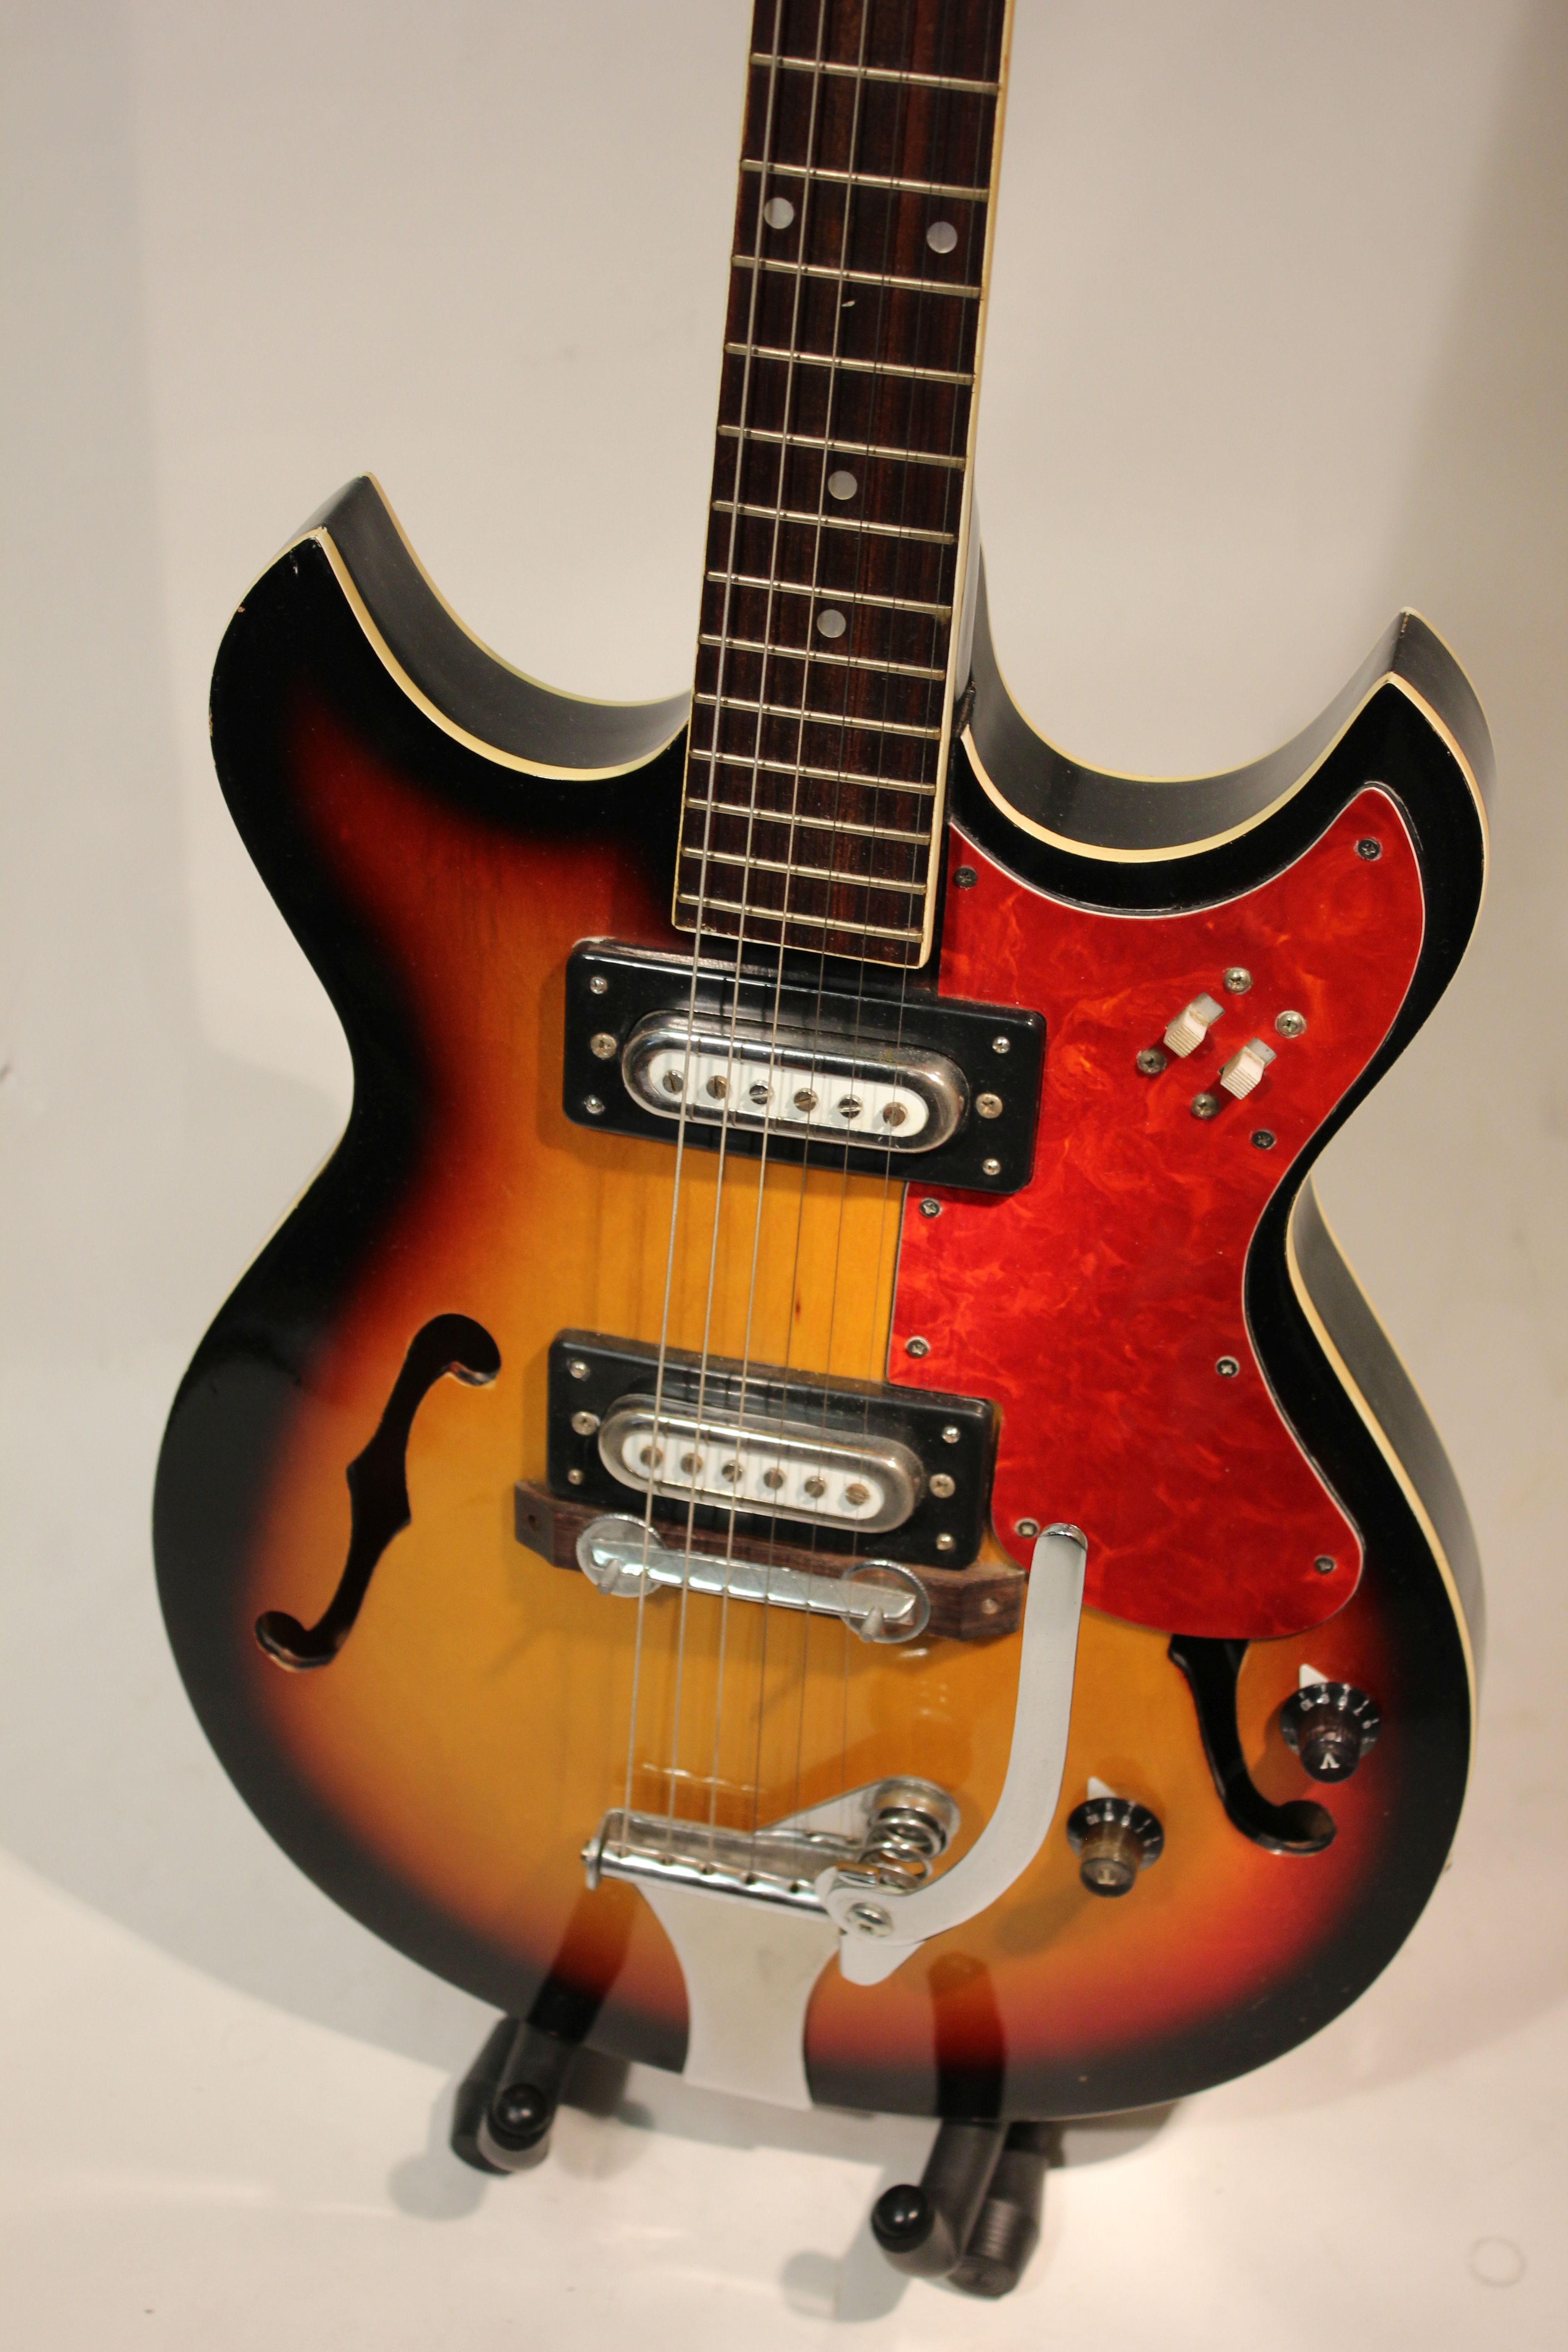 Guitar - Audition 7003 Electro acoustic thinline Teisco 1960s in great original condition, MIJ - Image 2 of 6